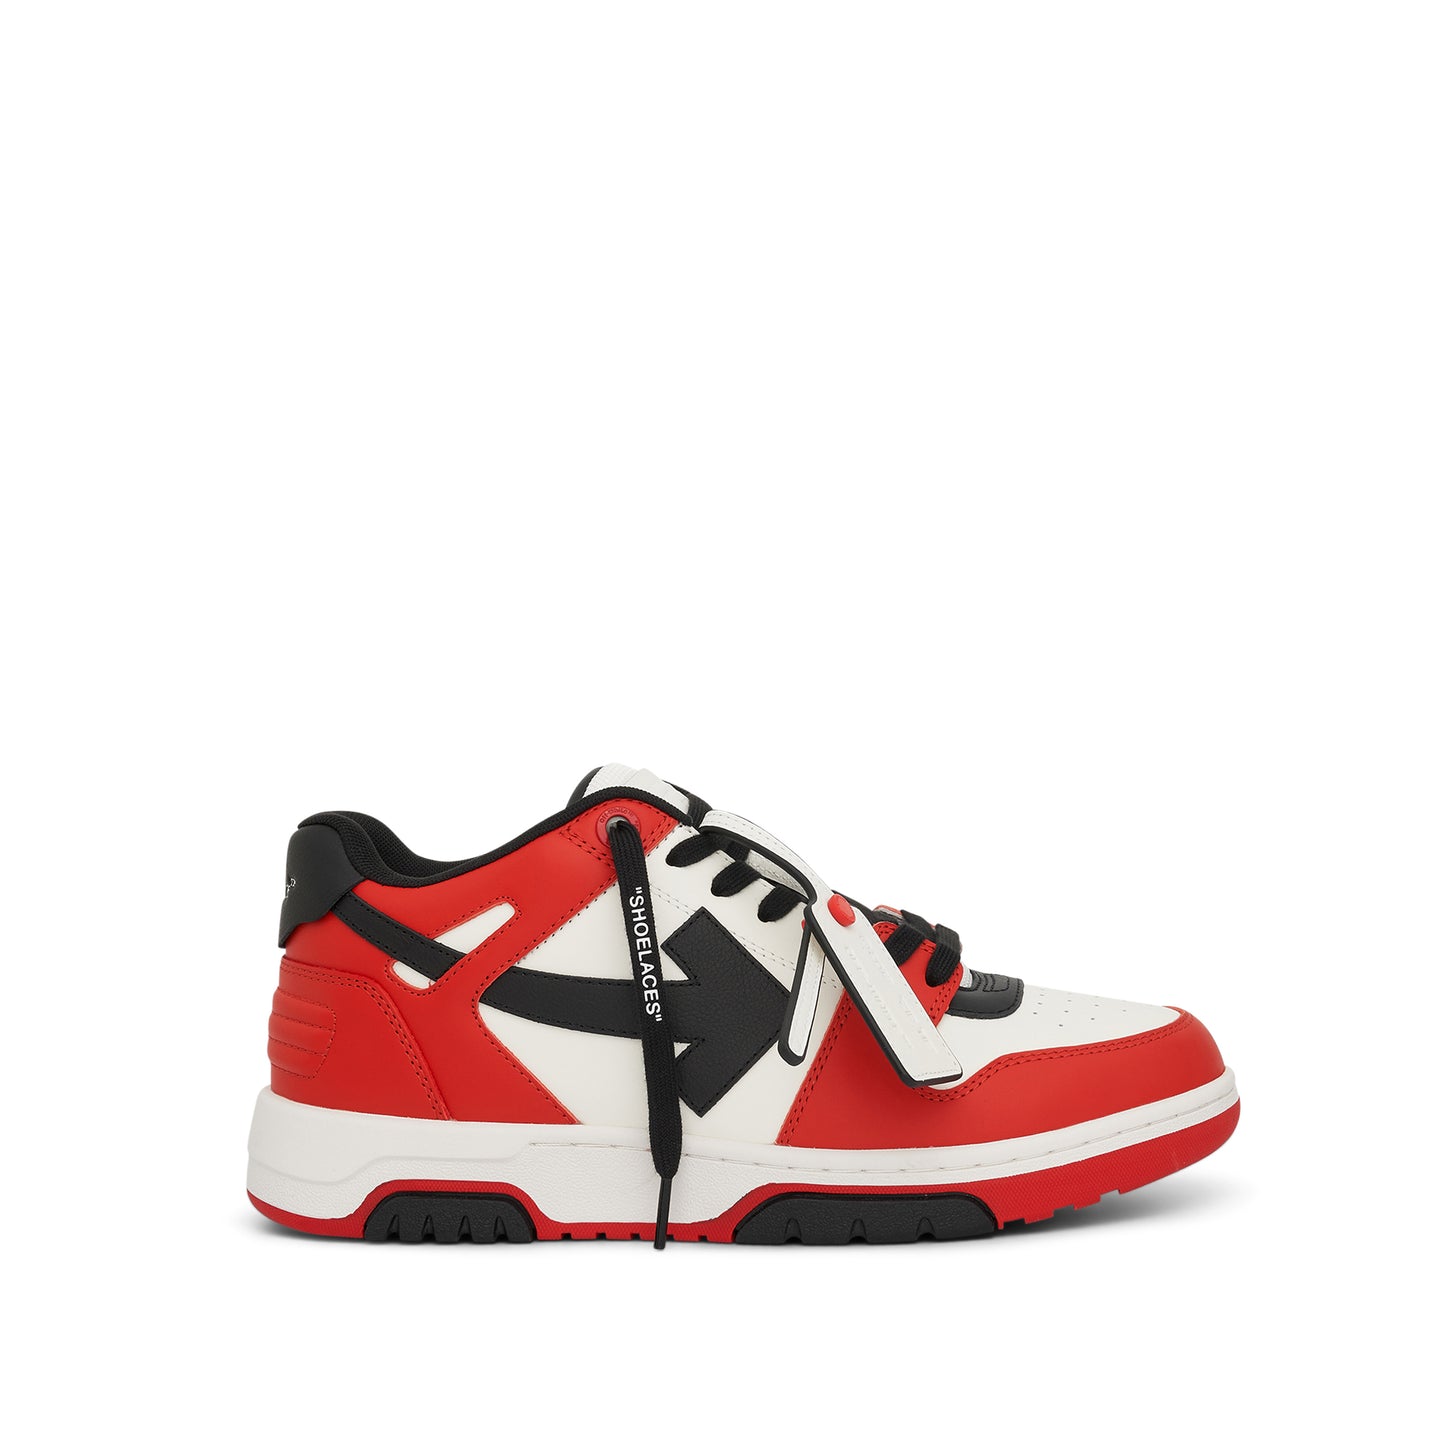 Out of Office Calf Leather Sneaker in Red/White/Black